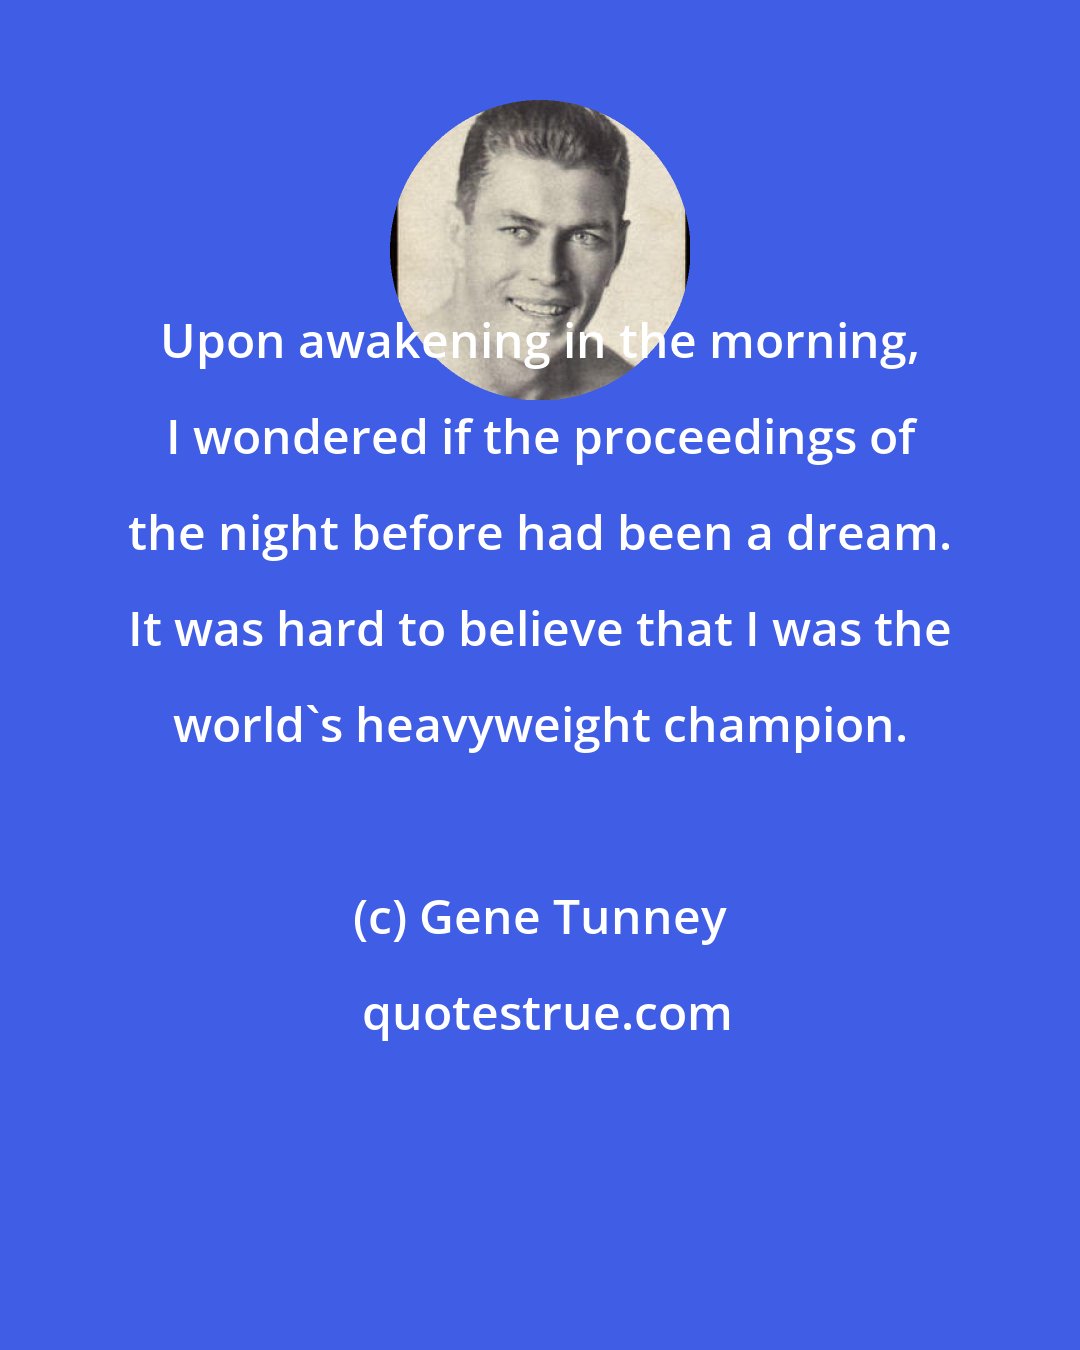 Gene Tunney: Upon awakening in the morning, I wondered if the proceedings of the night before had been a dream. It was hard to believe that I was the world's heavyweight champion.